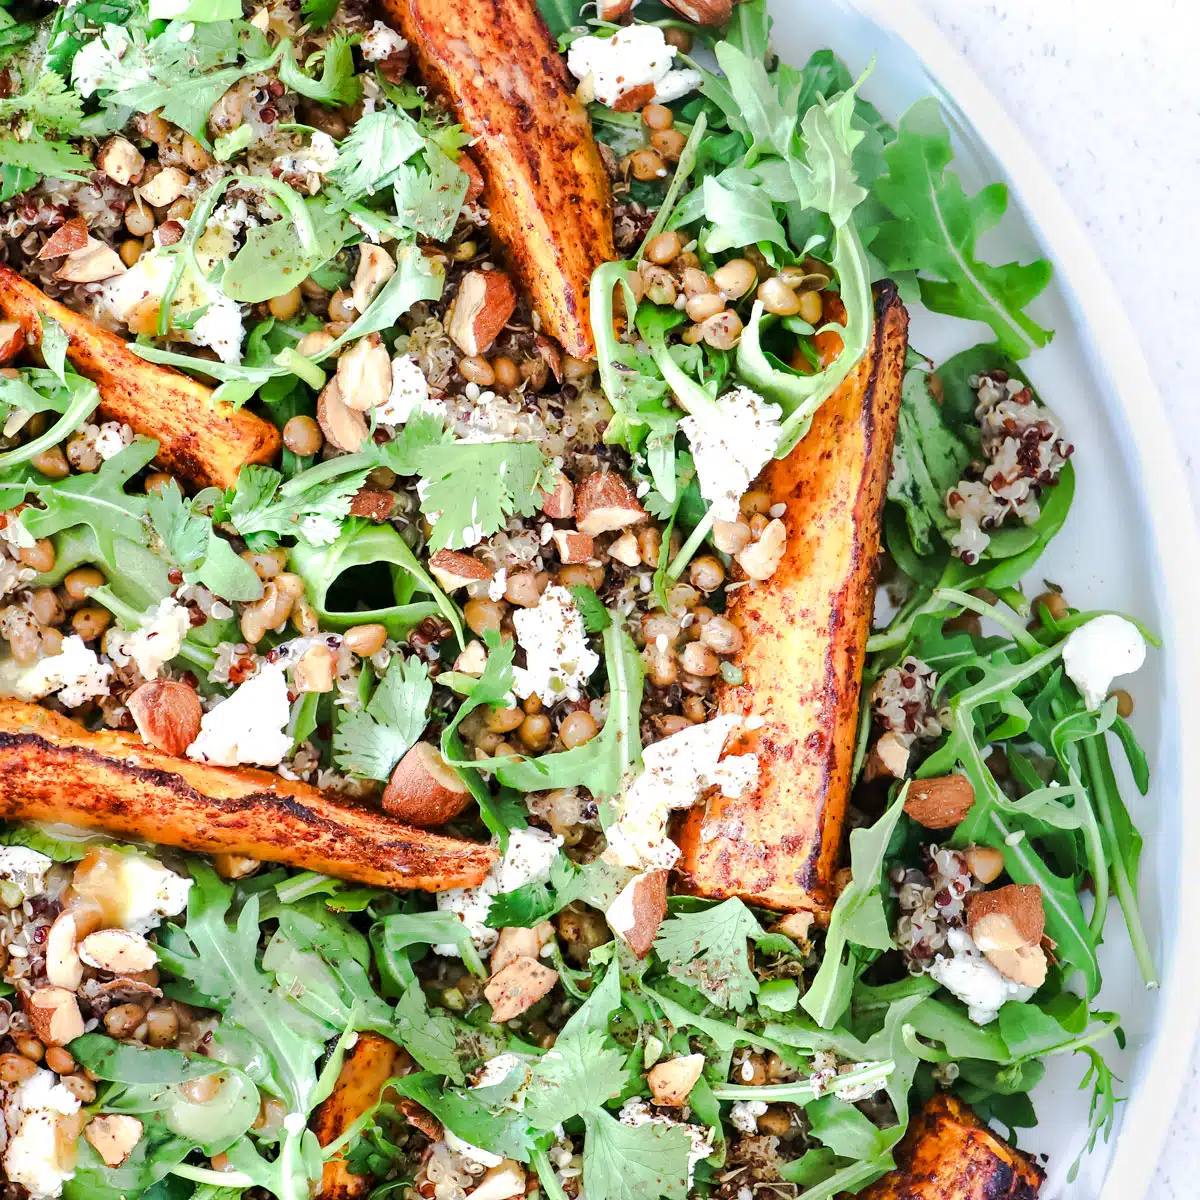 A close up looking into a bowl of sweet potato salad showing greens, potato, quinoa, lentils, goat's cheese and nuts.